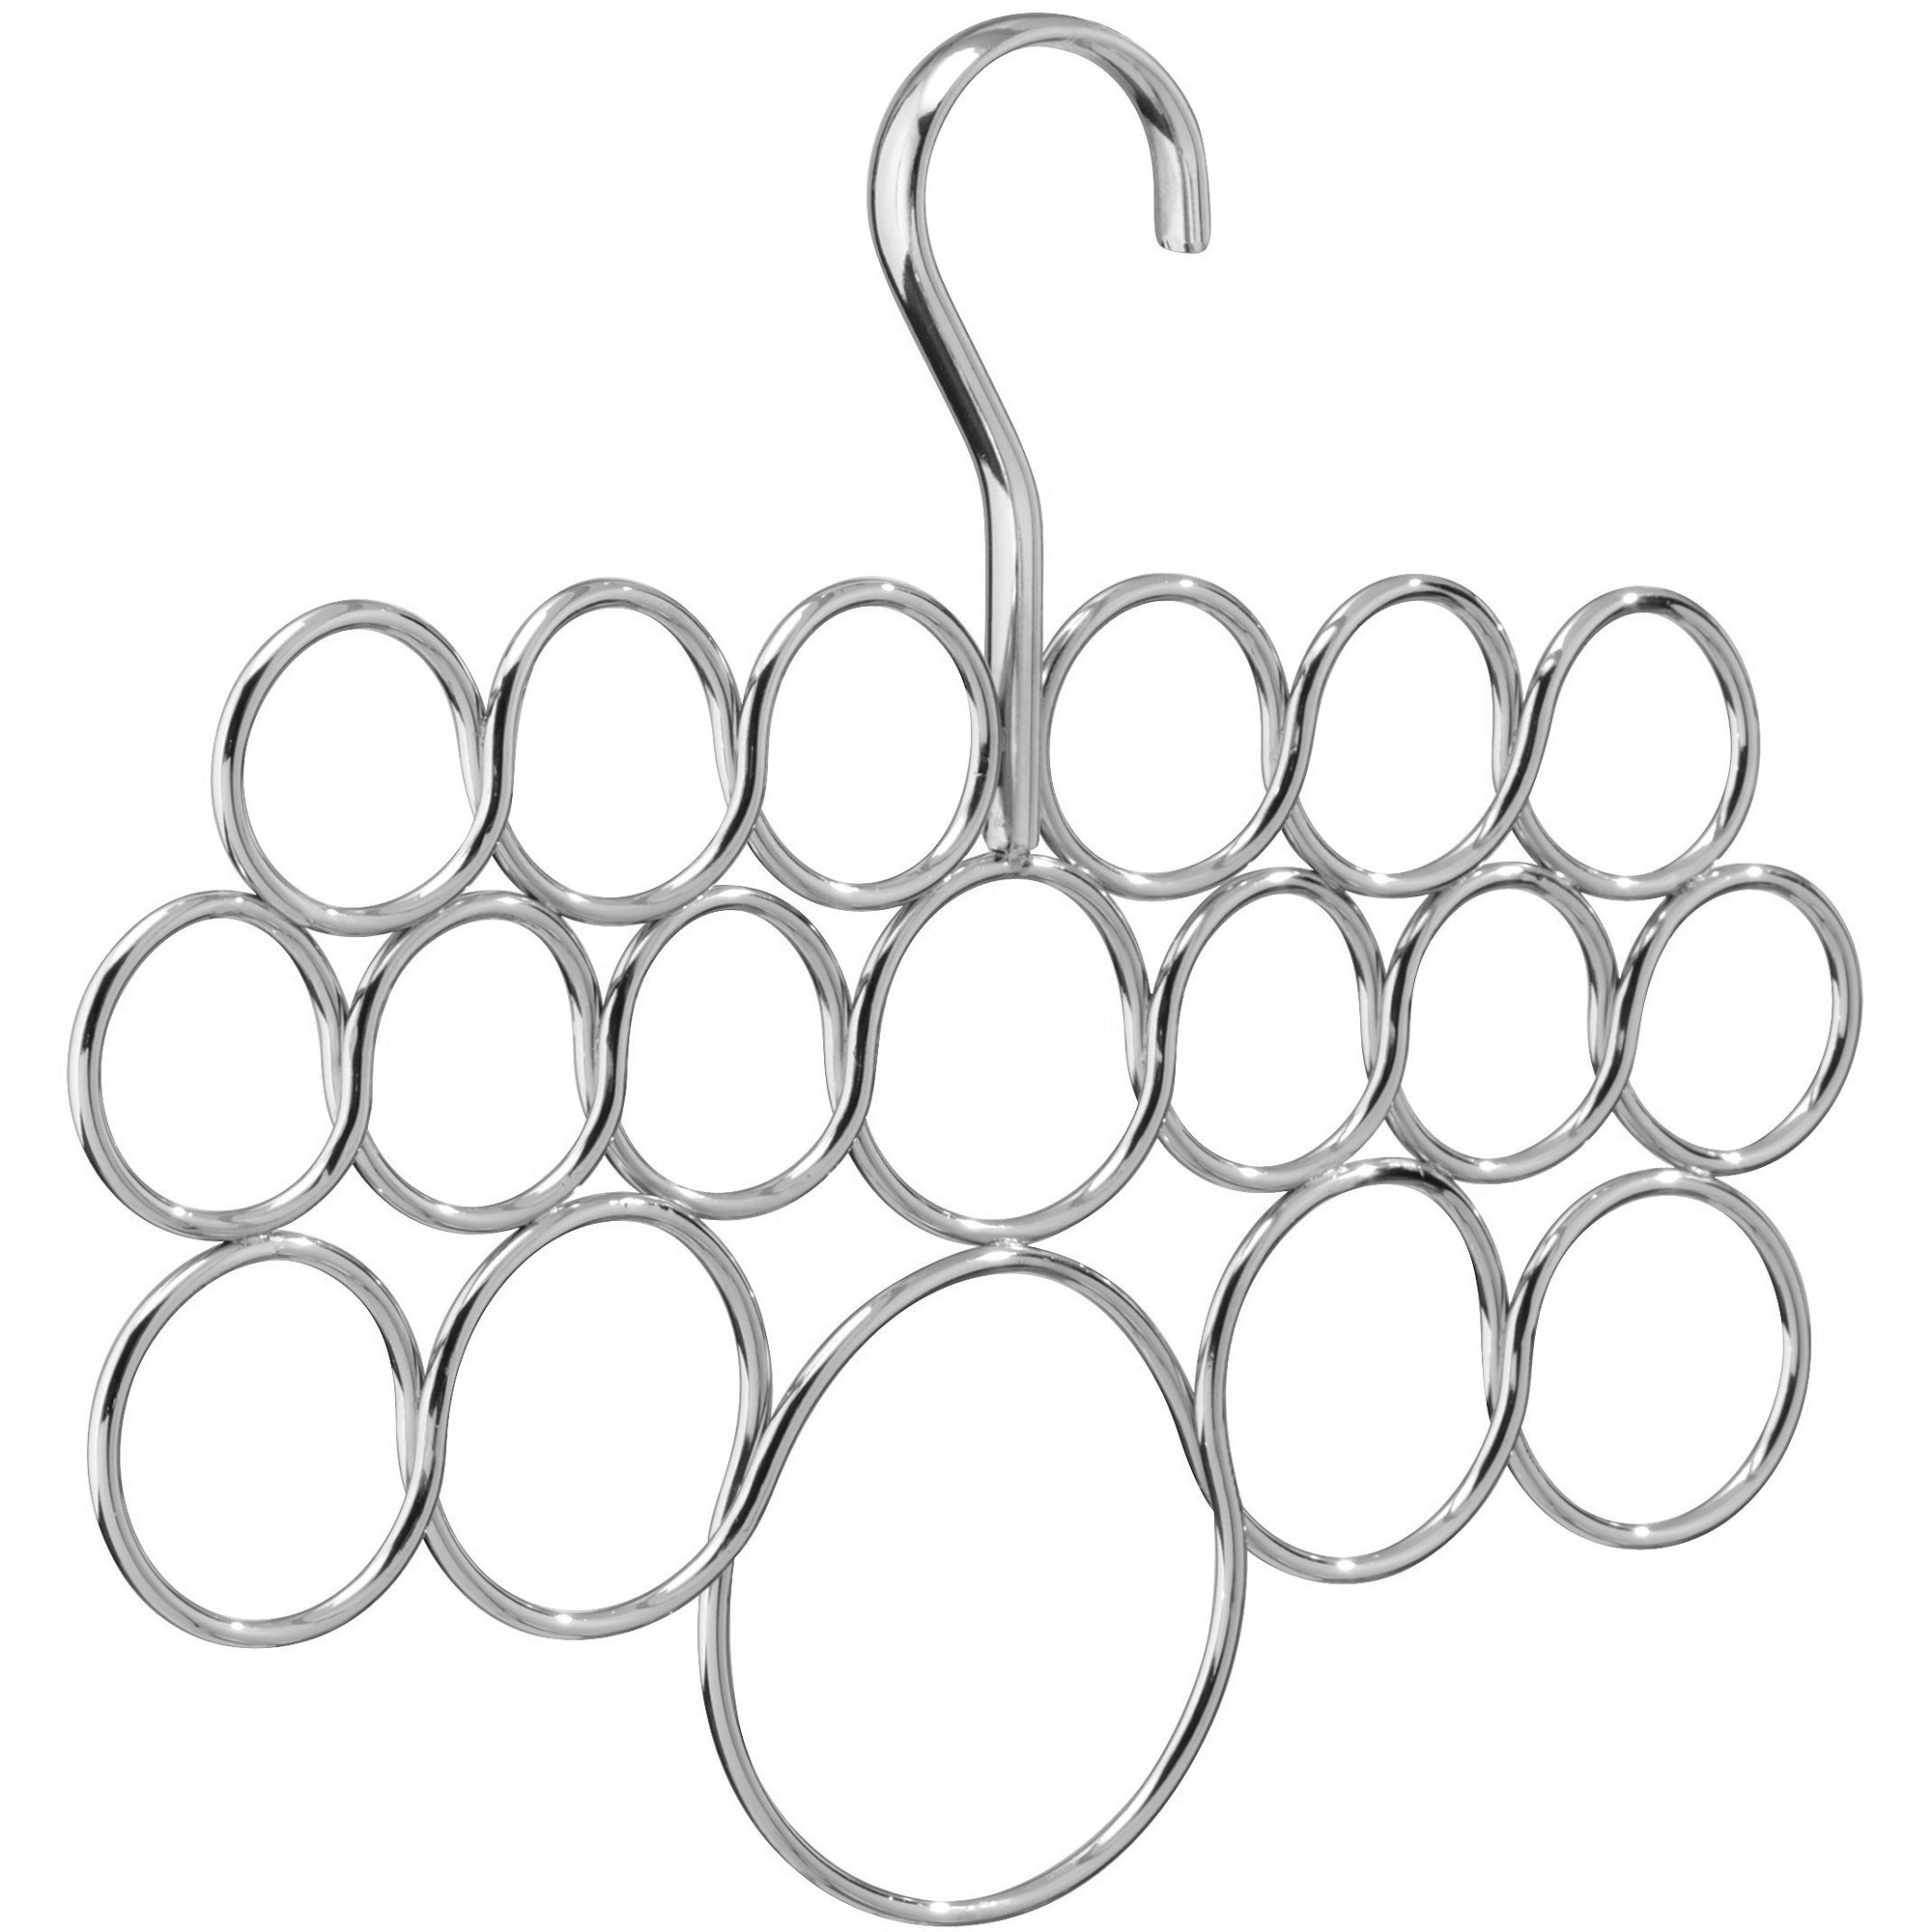 iDesign Stainless Steel Axis 18 Loop Over the Rod Scarf Hanger - image 1 of 4